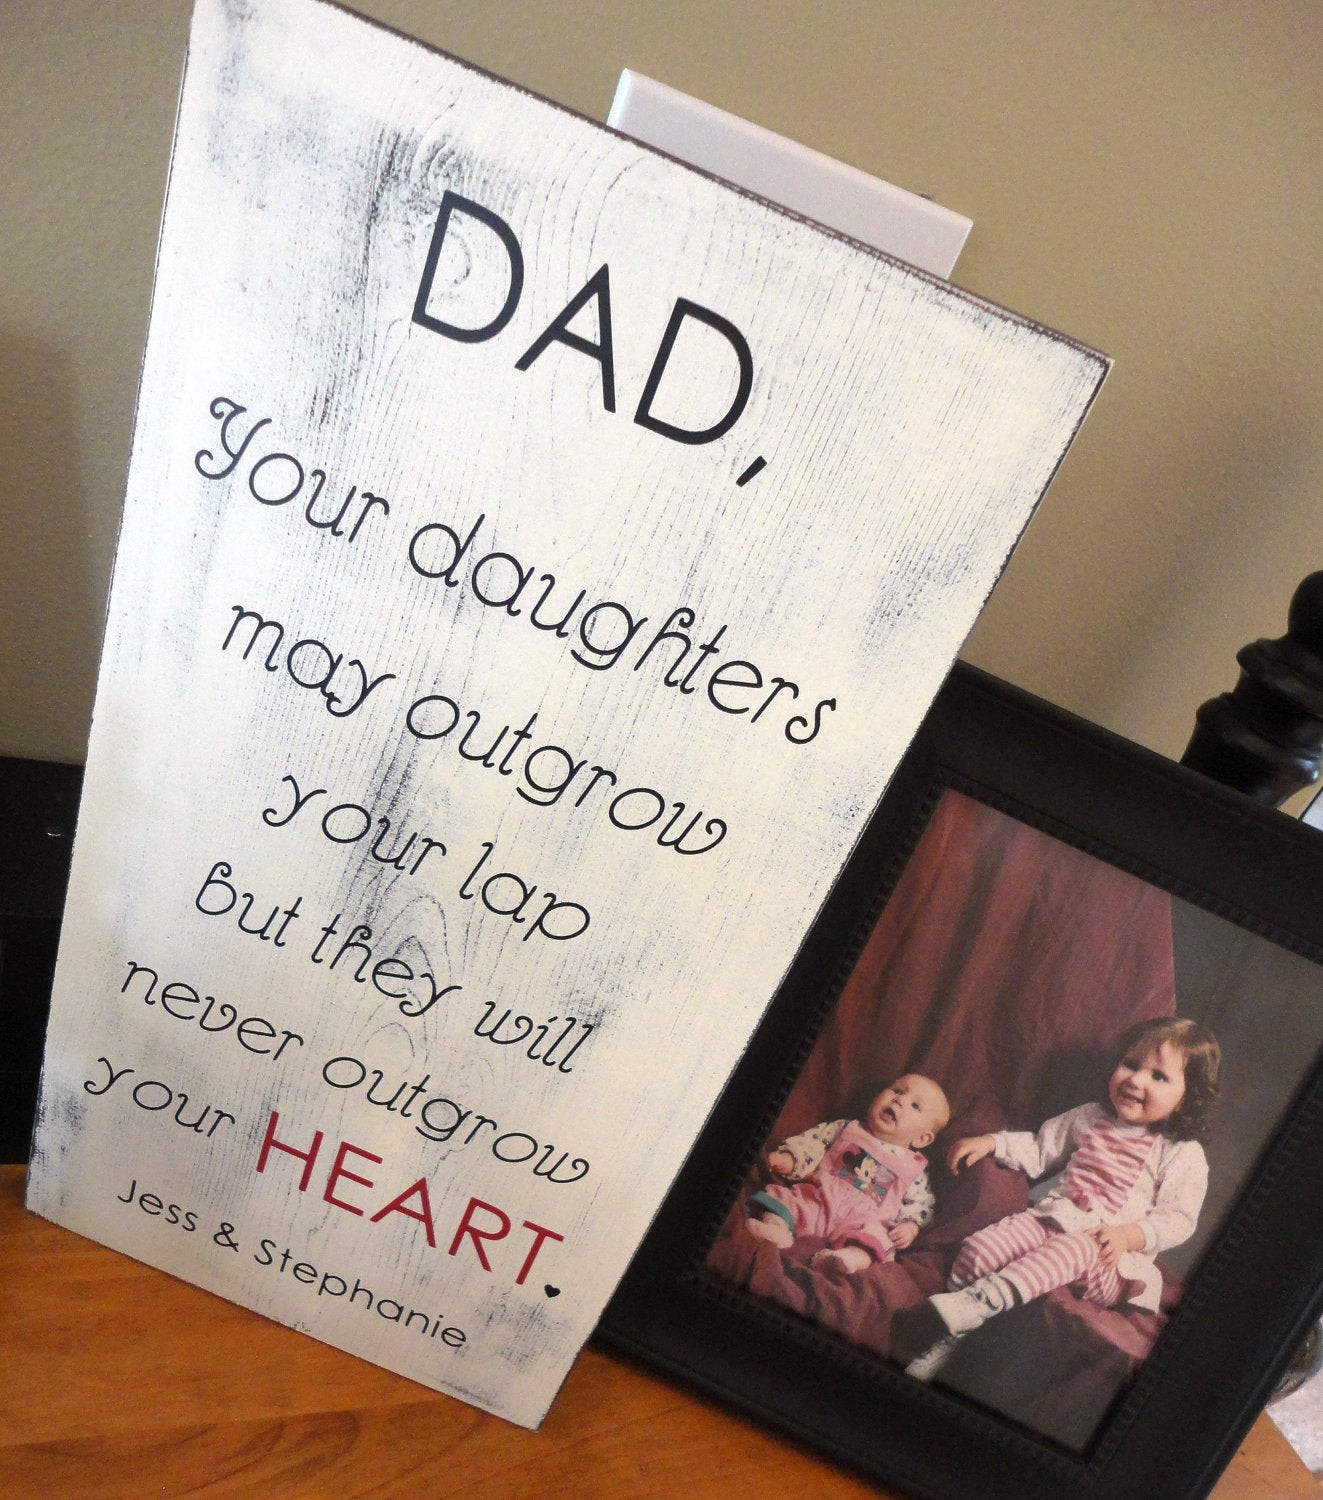 Dads Birthday Gifts
 Rustic Father s Day Sign Birthday Sign I Love You Sign